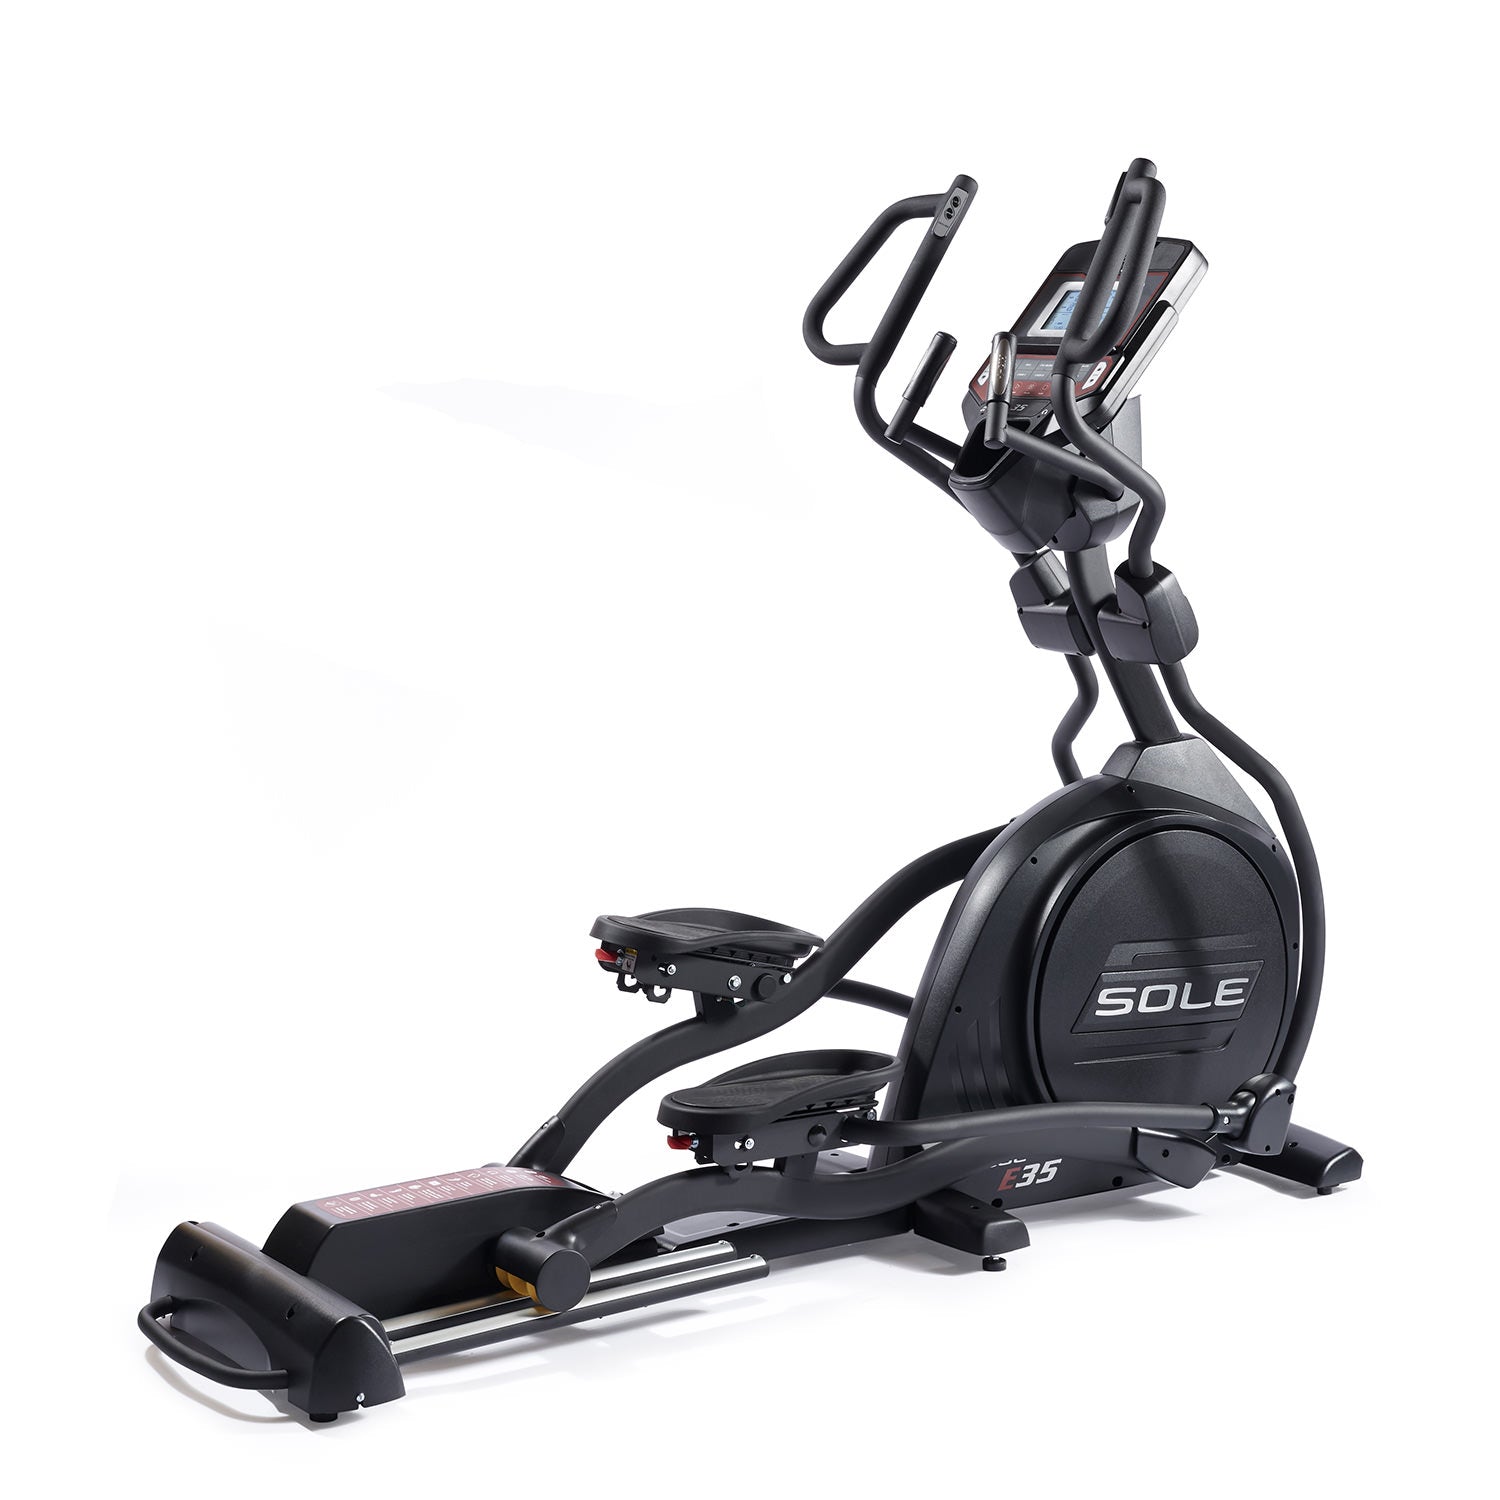 Sole E35 Elliptical Cross Trainer - In Store For You To Try